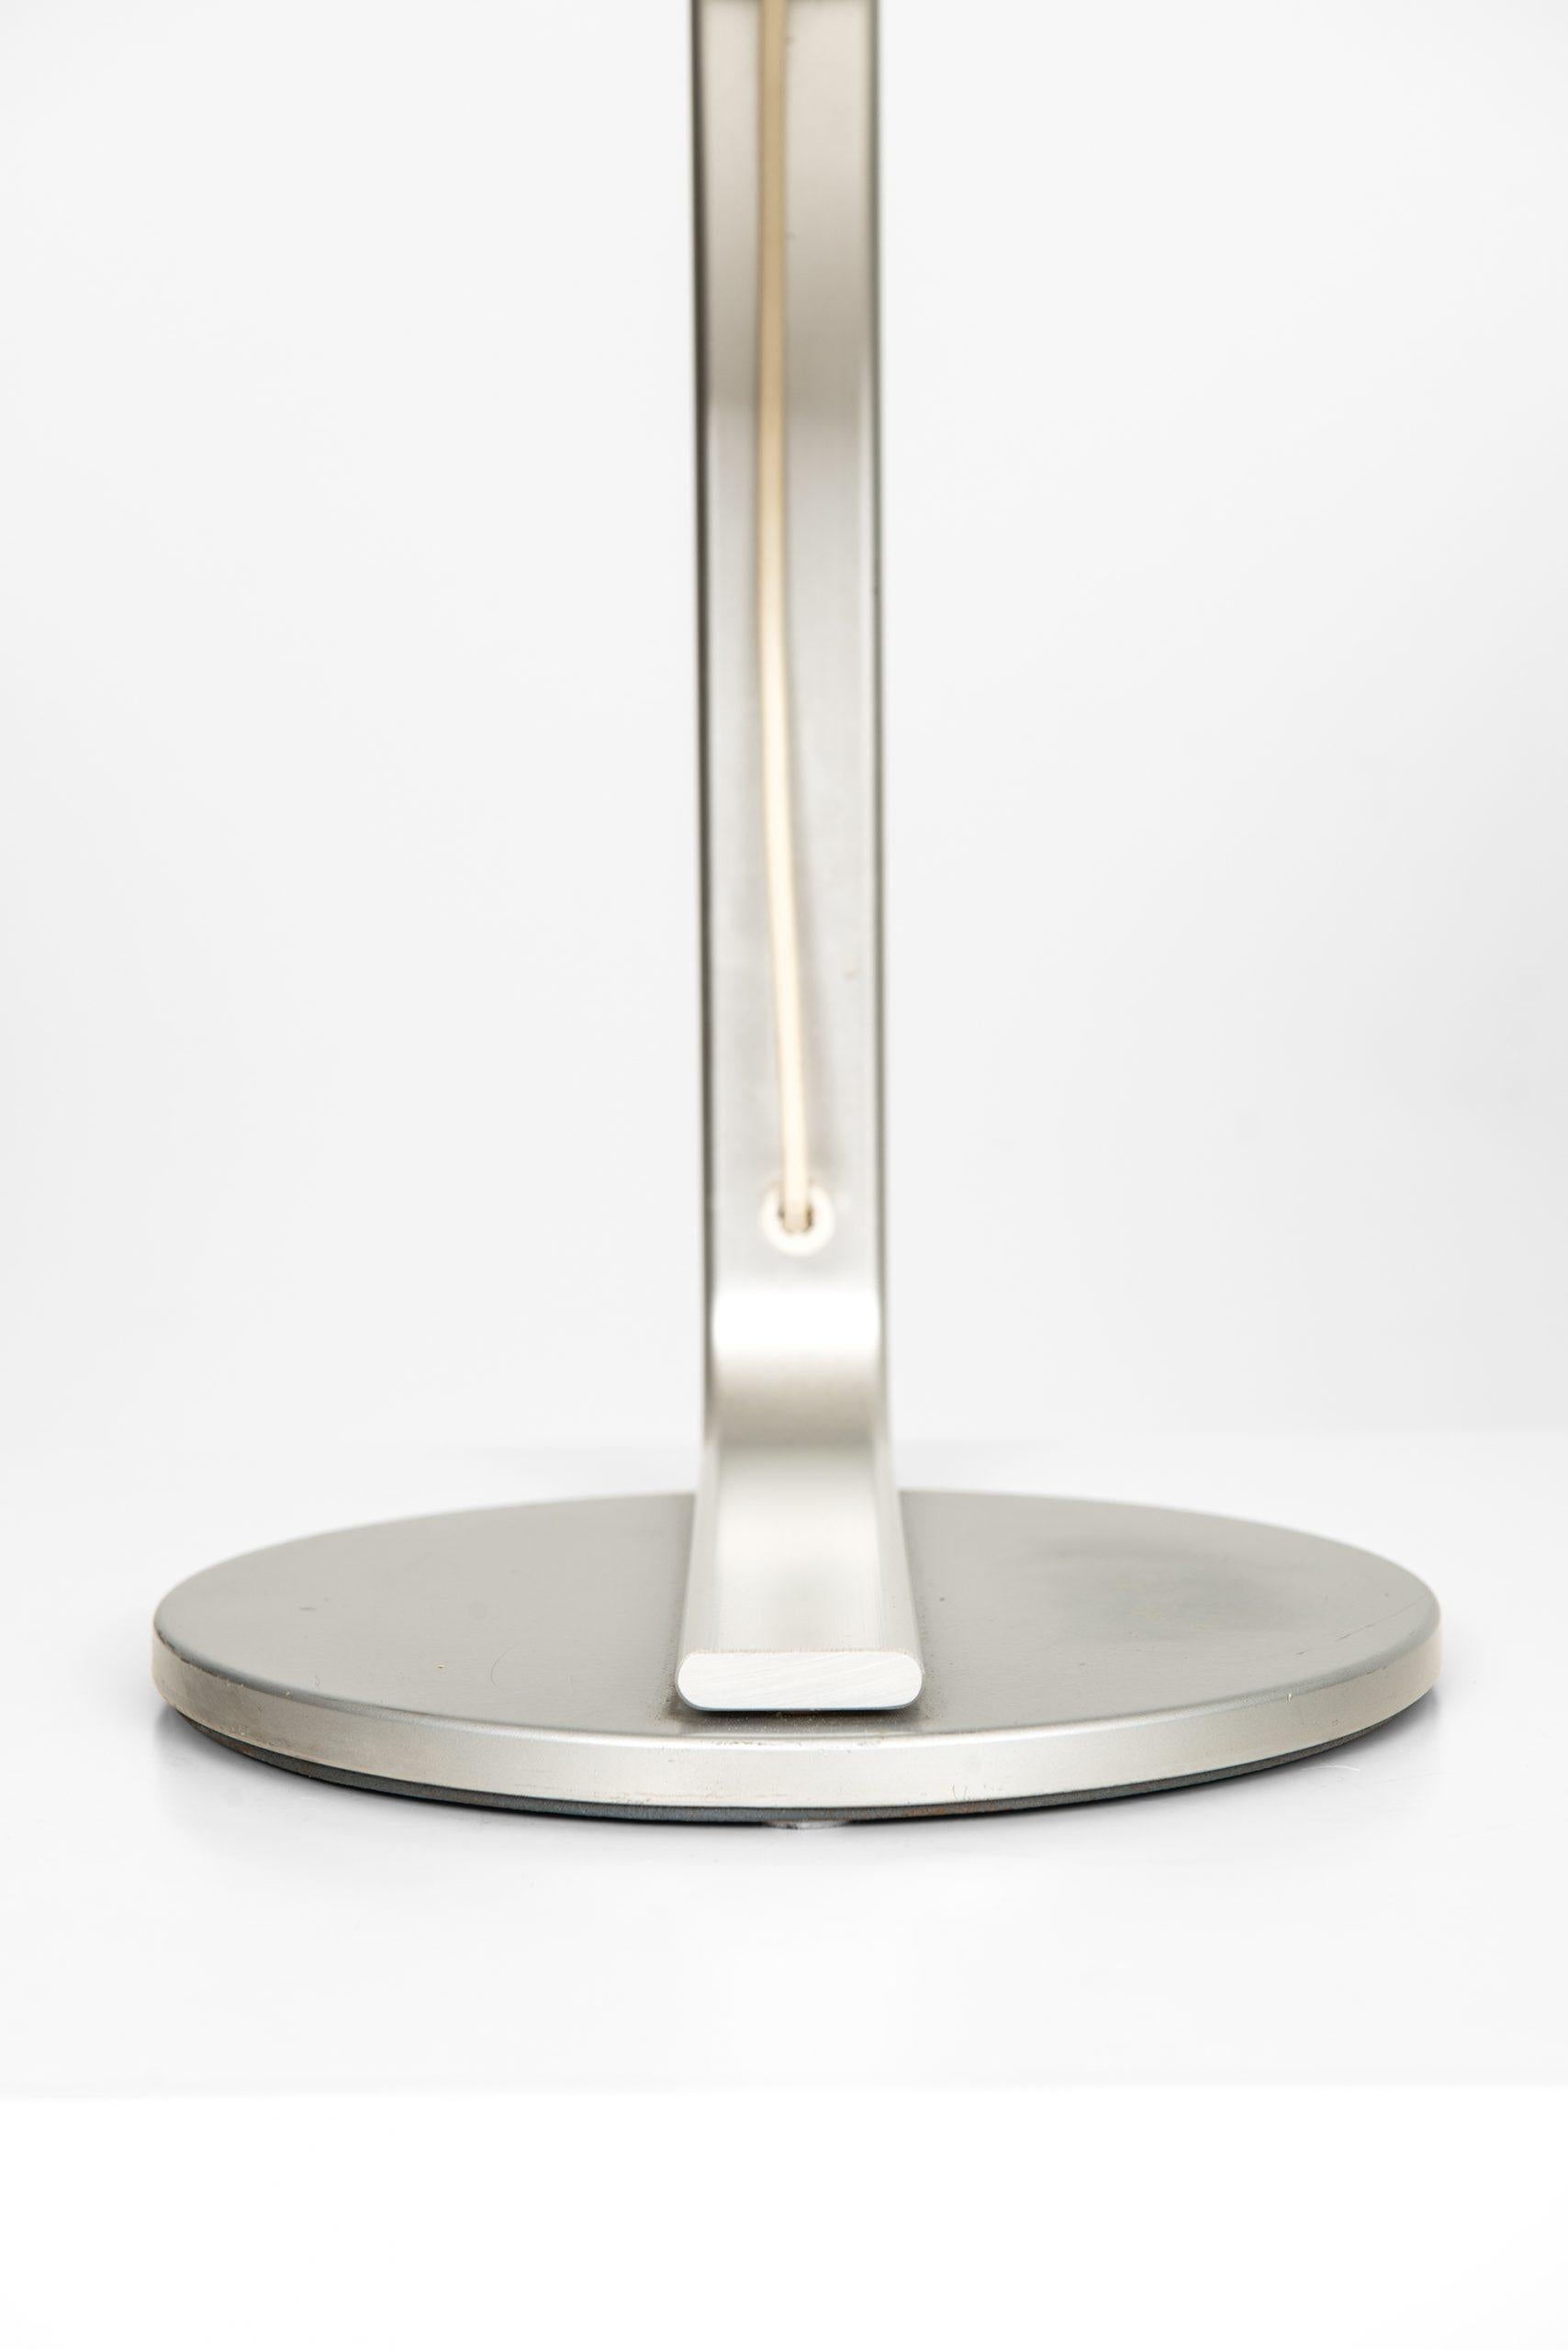 Rare table lamp model B-33. Produced by Bergbom in Sweden.